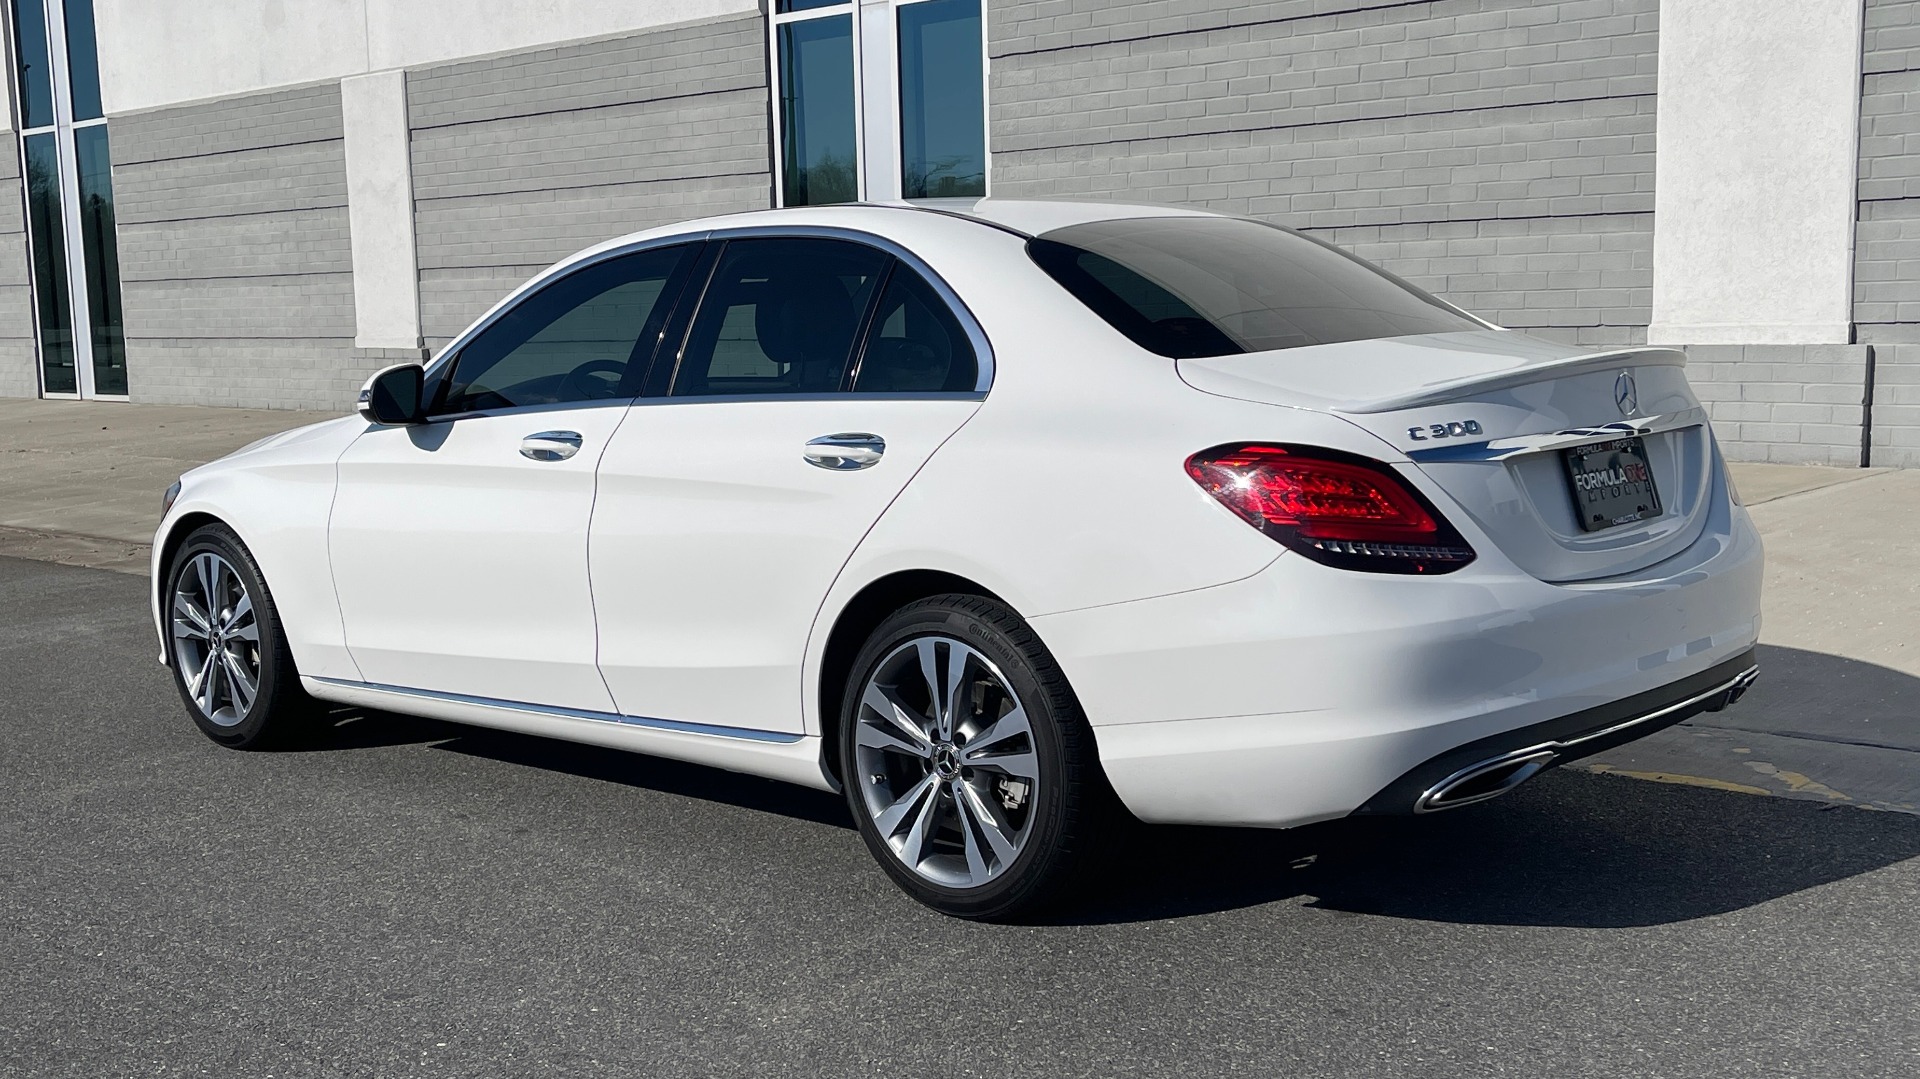 Used 2020 Mercedes-Benz C-CLASS C 300 2.0L SEDAN / RWD / 9-SPD AUTO / HTD STS / REARVIEW for sale $40,995 at Formula Imports in Charlotte NC 28227 4